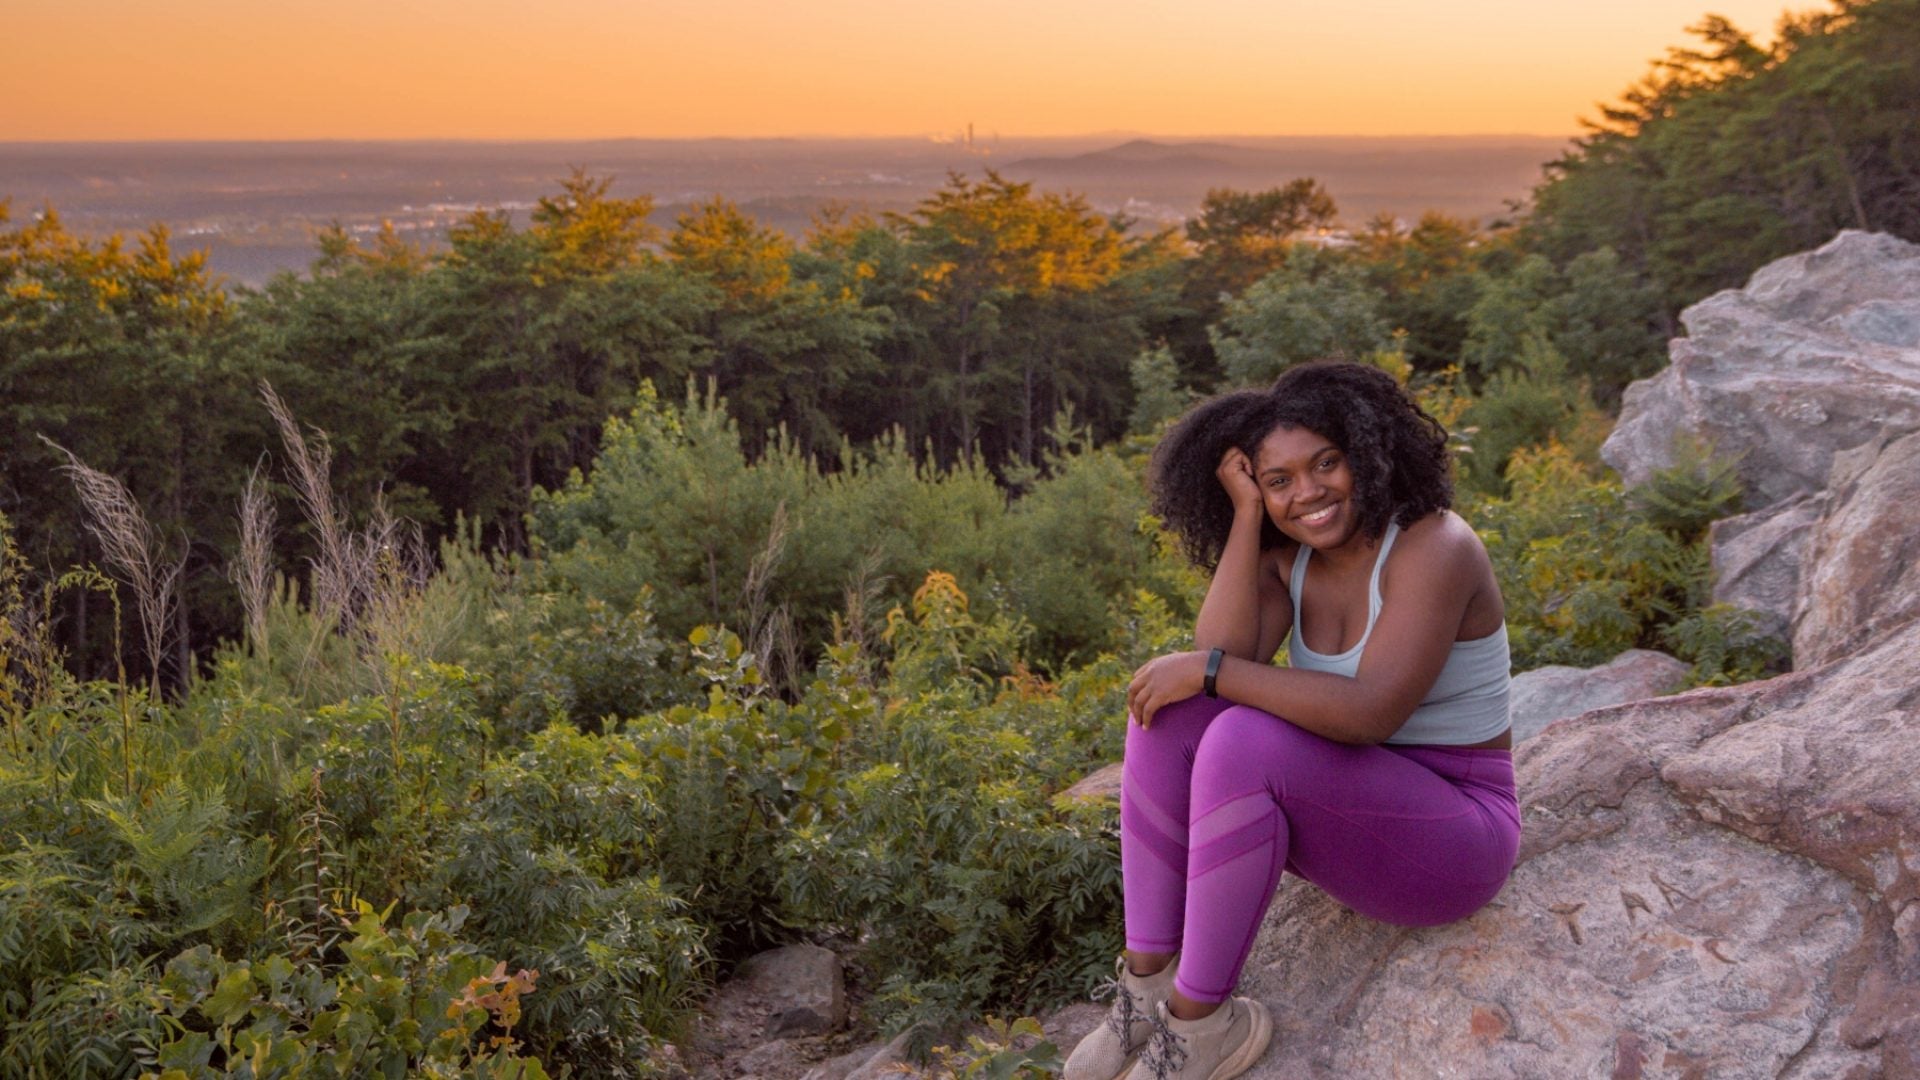 A Black Woman's Guide To Atlanta's Hiking Scene: Where To Go, What To Pack And Groups To Trek With